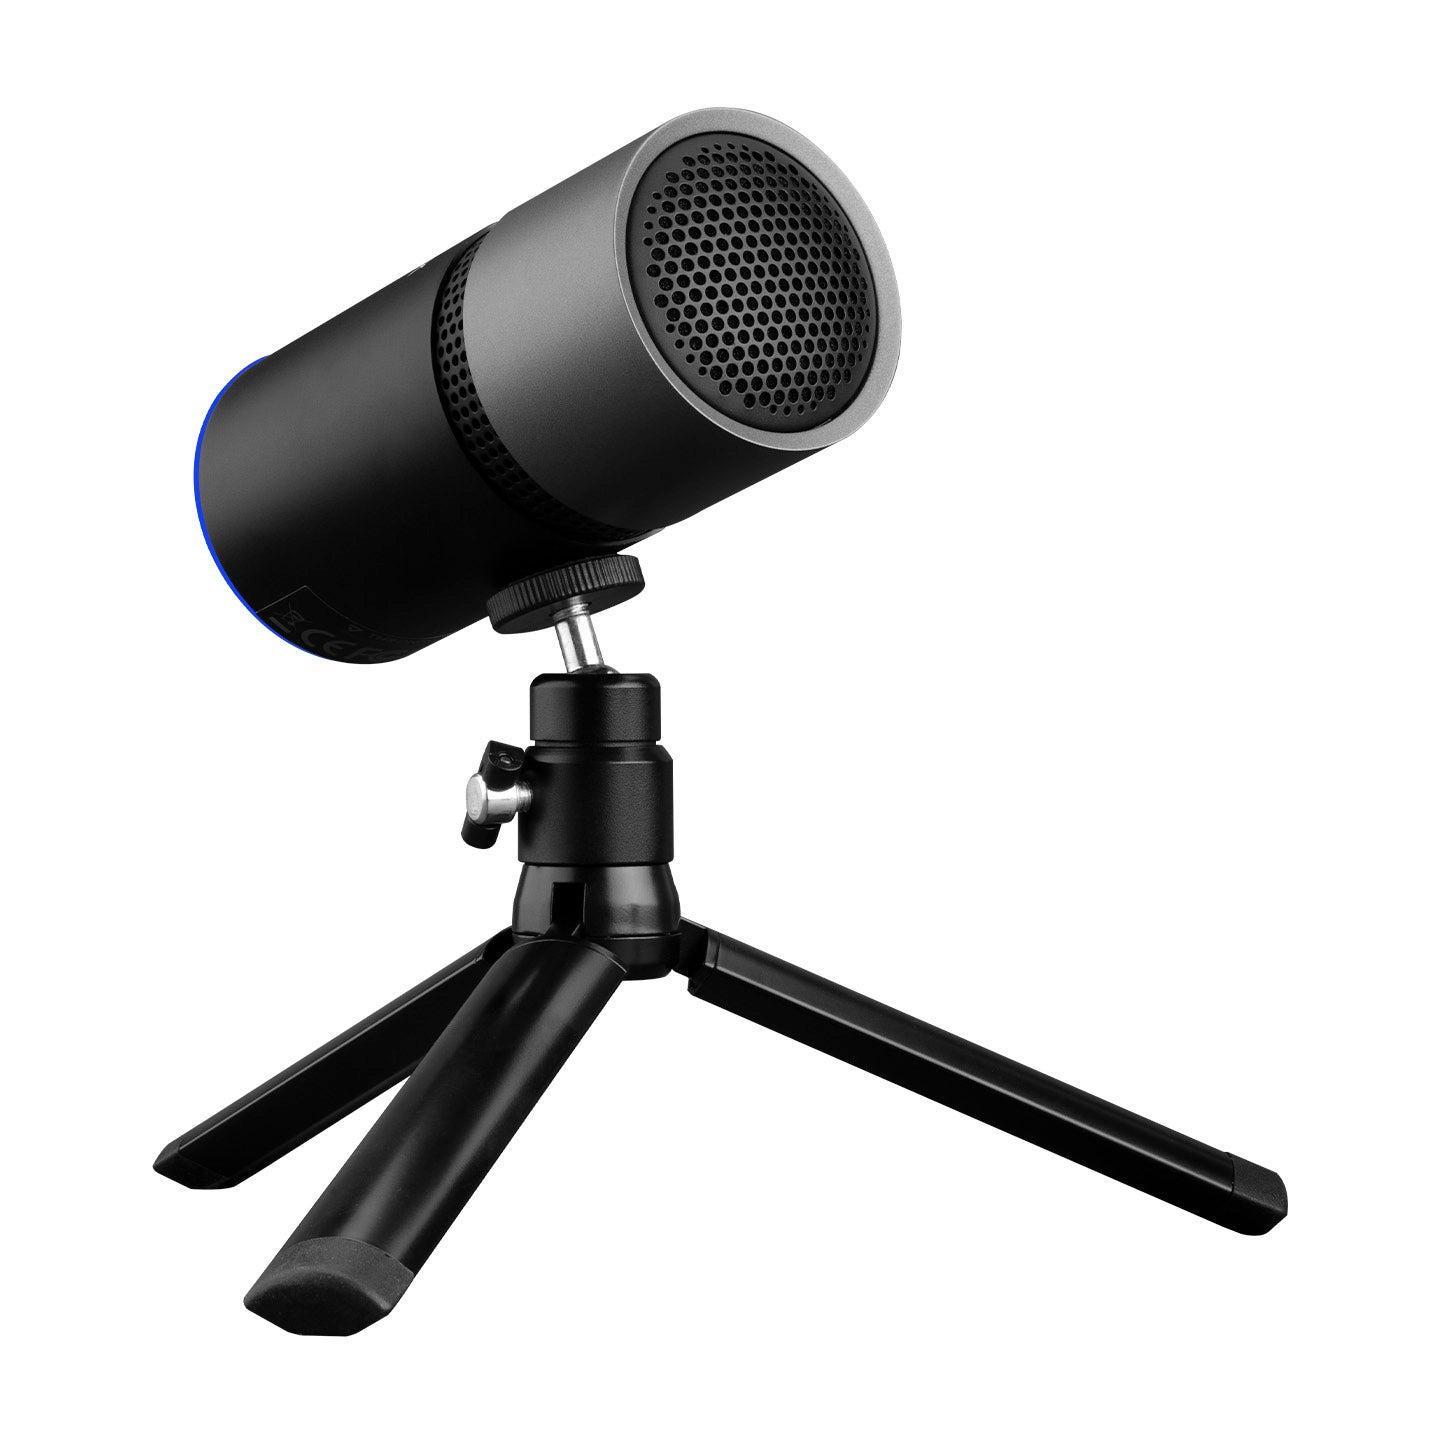 Thronmax M8 Pulse Usb Microphones For Game And Online Streaming